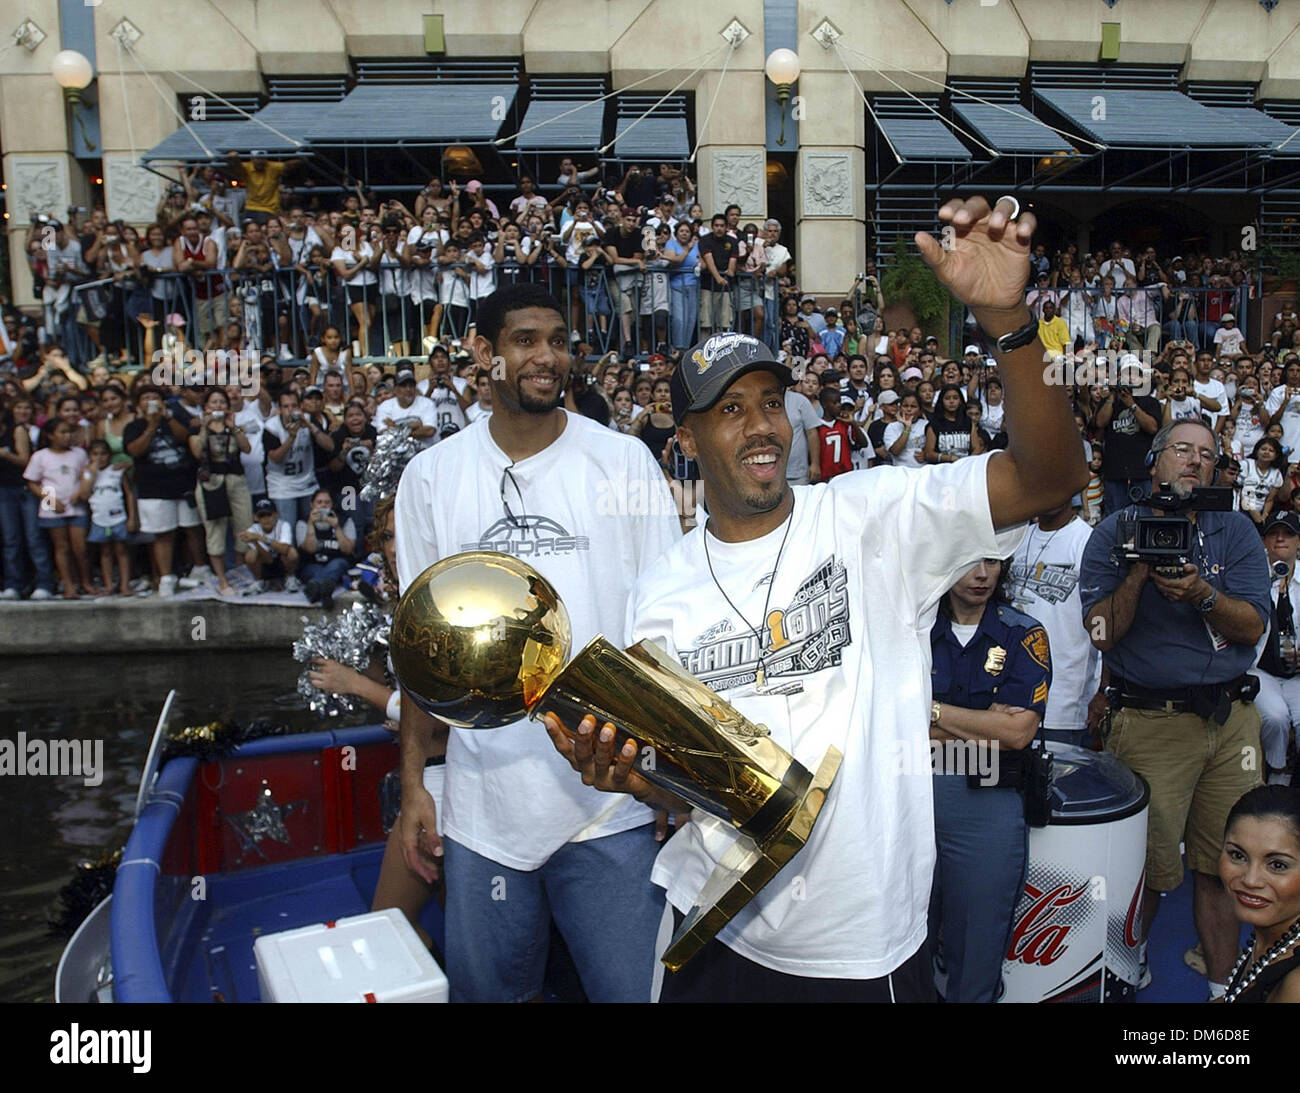 Jun 25, 2005; San Antonio , TX, USA; Spurs' headcoach GREGG POPOVICH speaks  to the crowd during the championship celebration held Saturday June 25,  2005 at the Alamodome. Mandatory Credit: Photo by